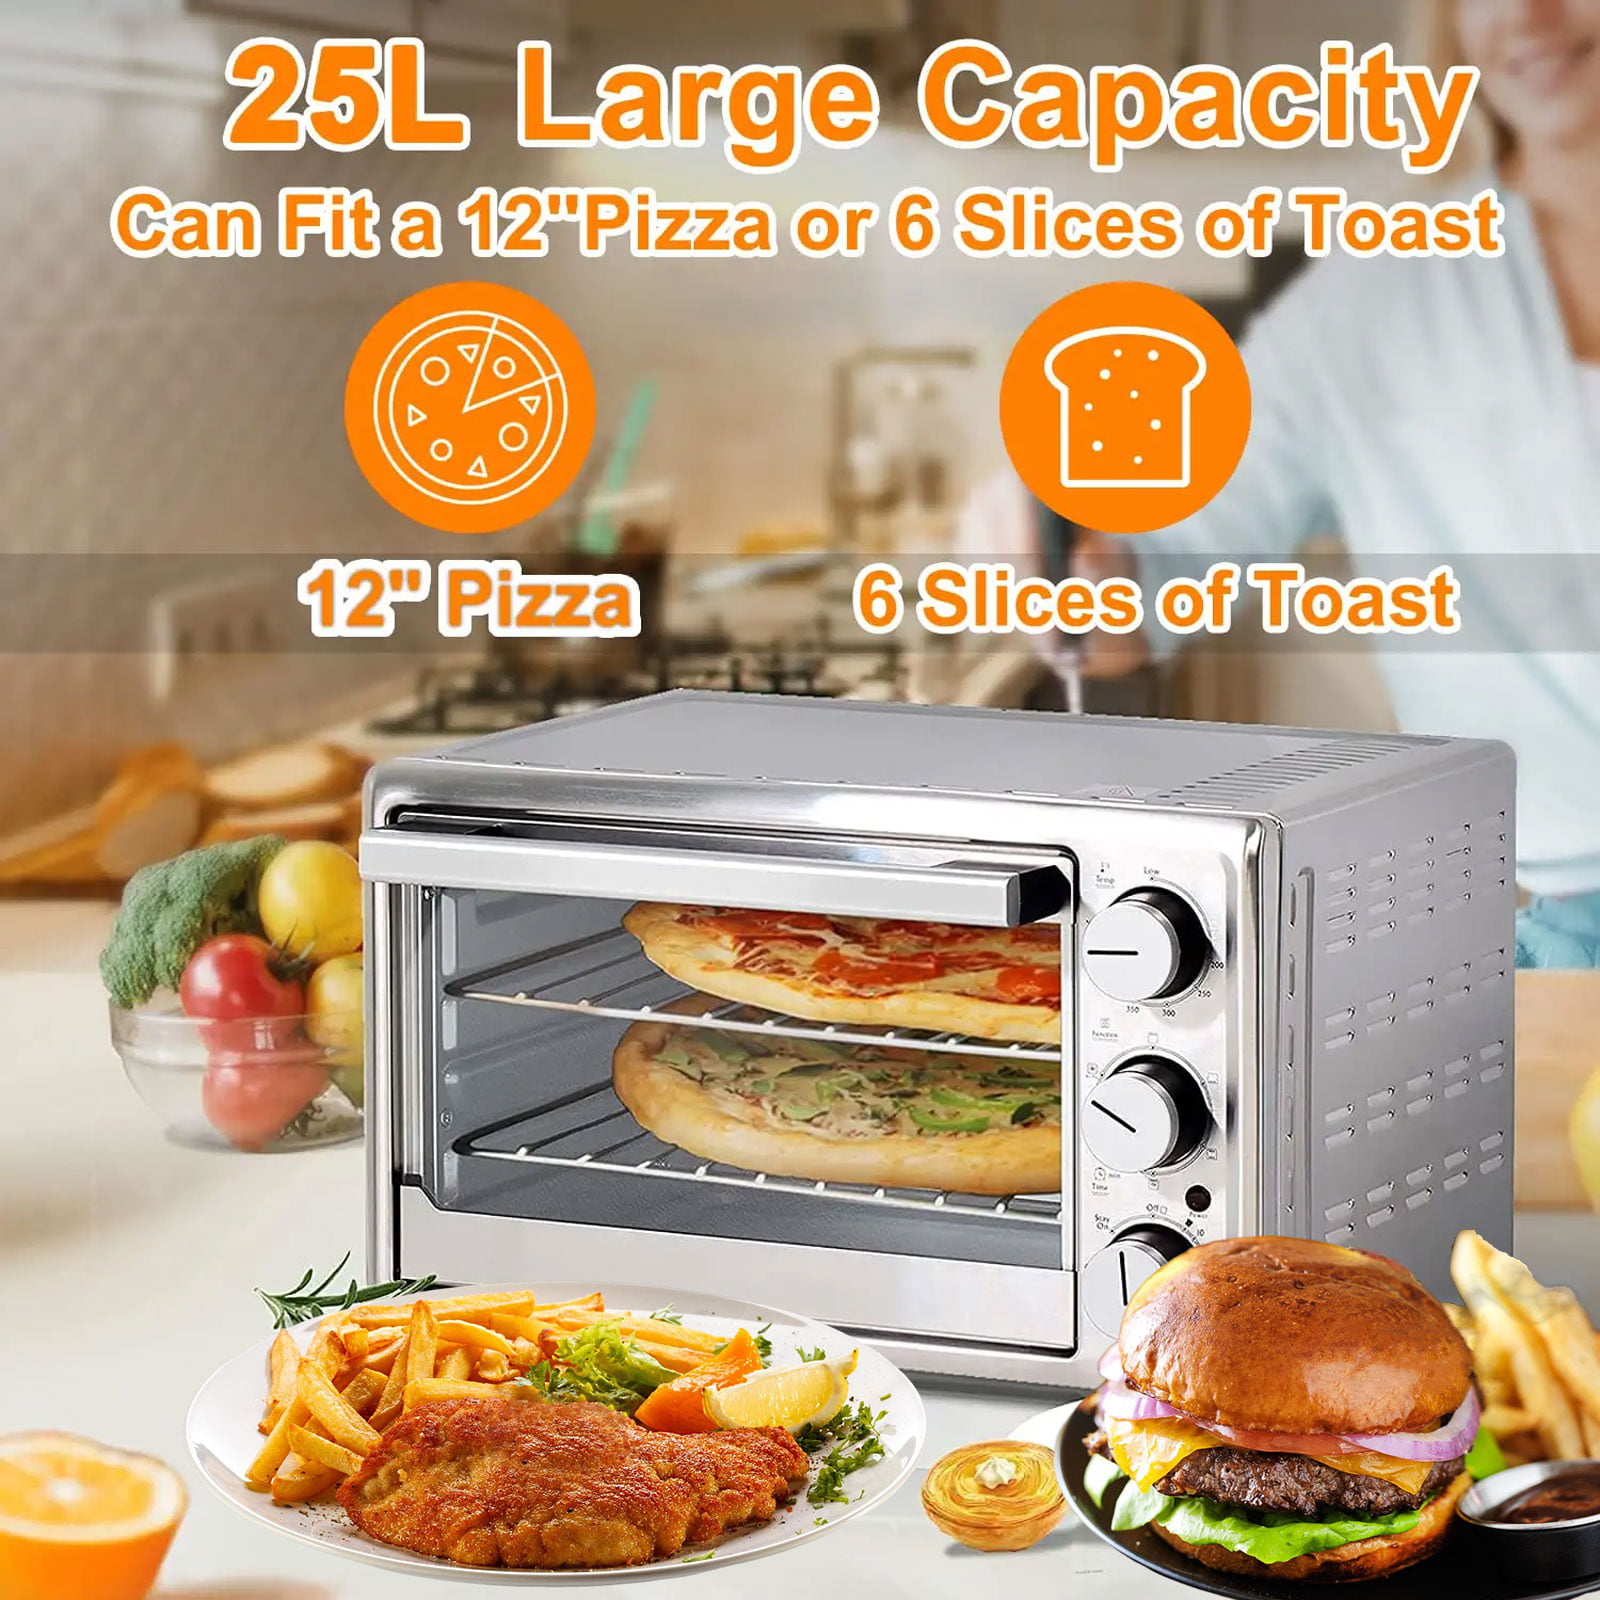  Air Fryer Toaster Oven，Kitchen Commercial Pizza Oven Stainless  Steel Pan, 1450W Stainless Steel Toaster Ovens Countertop Combo with Grill,  Pizza Pan: Home & Kitchen